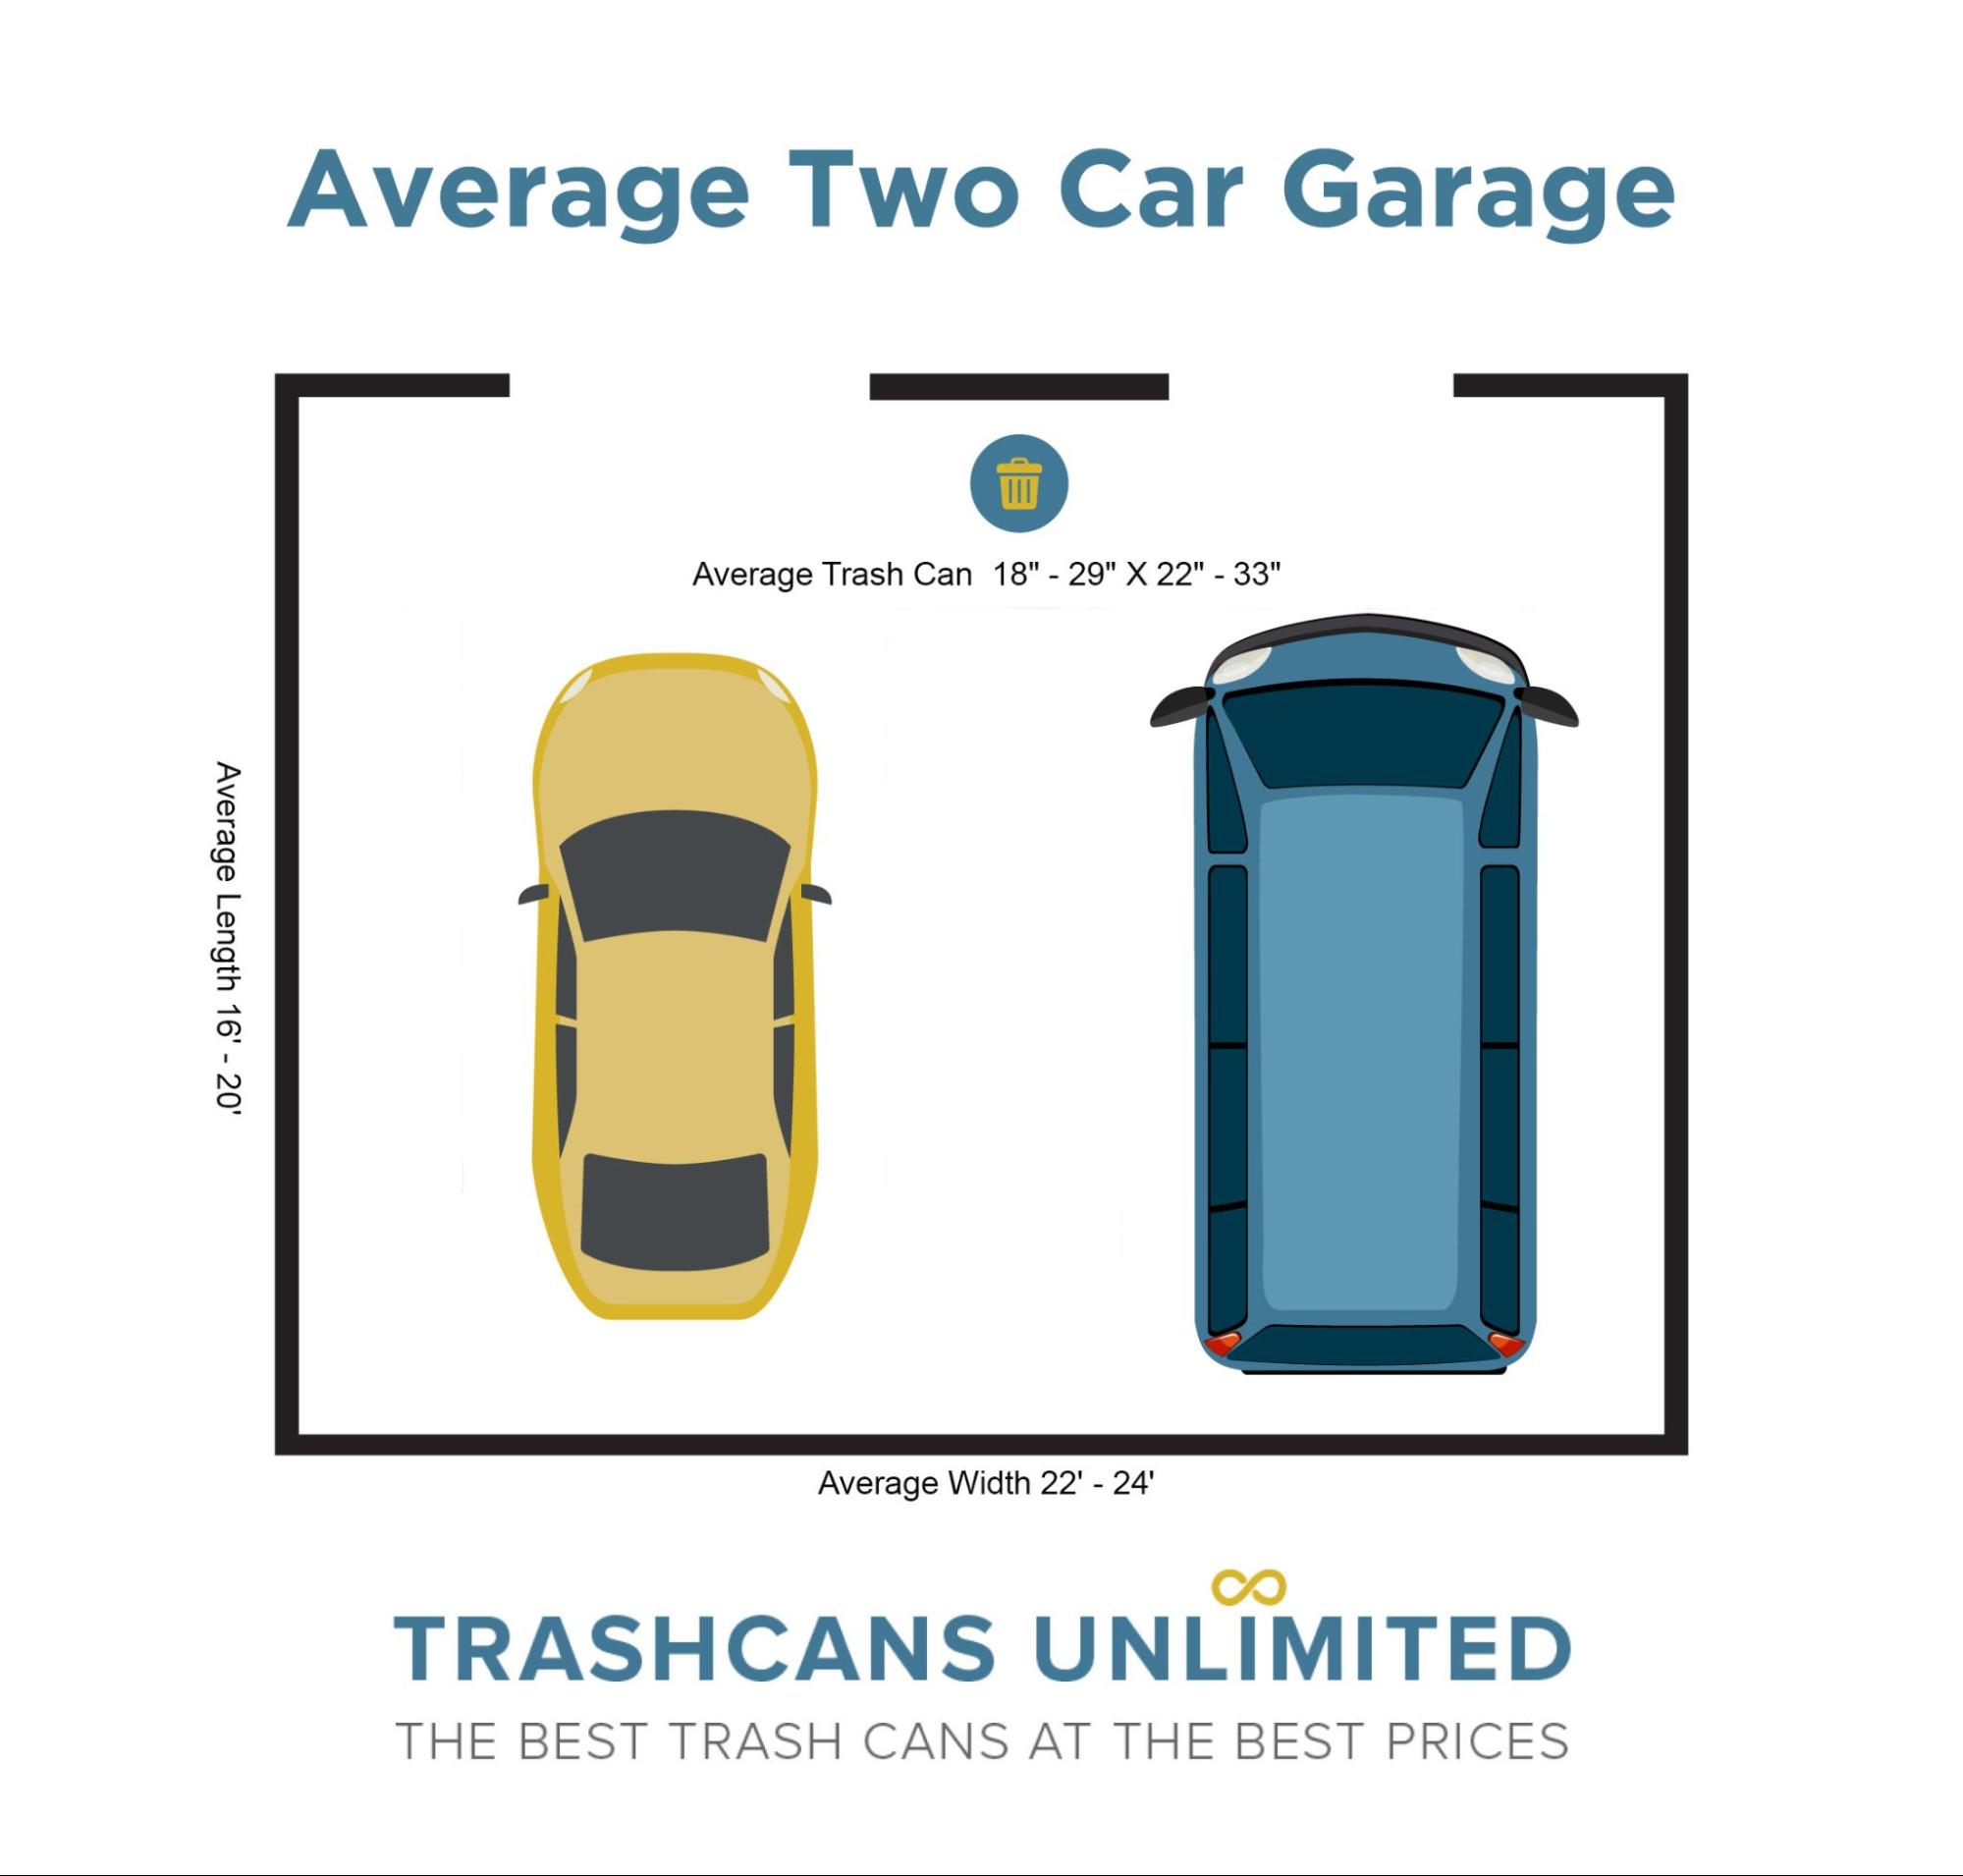 How to Lay Out a Parking Lot Based on Dimensions - Trash Cans Unlimited